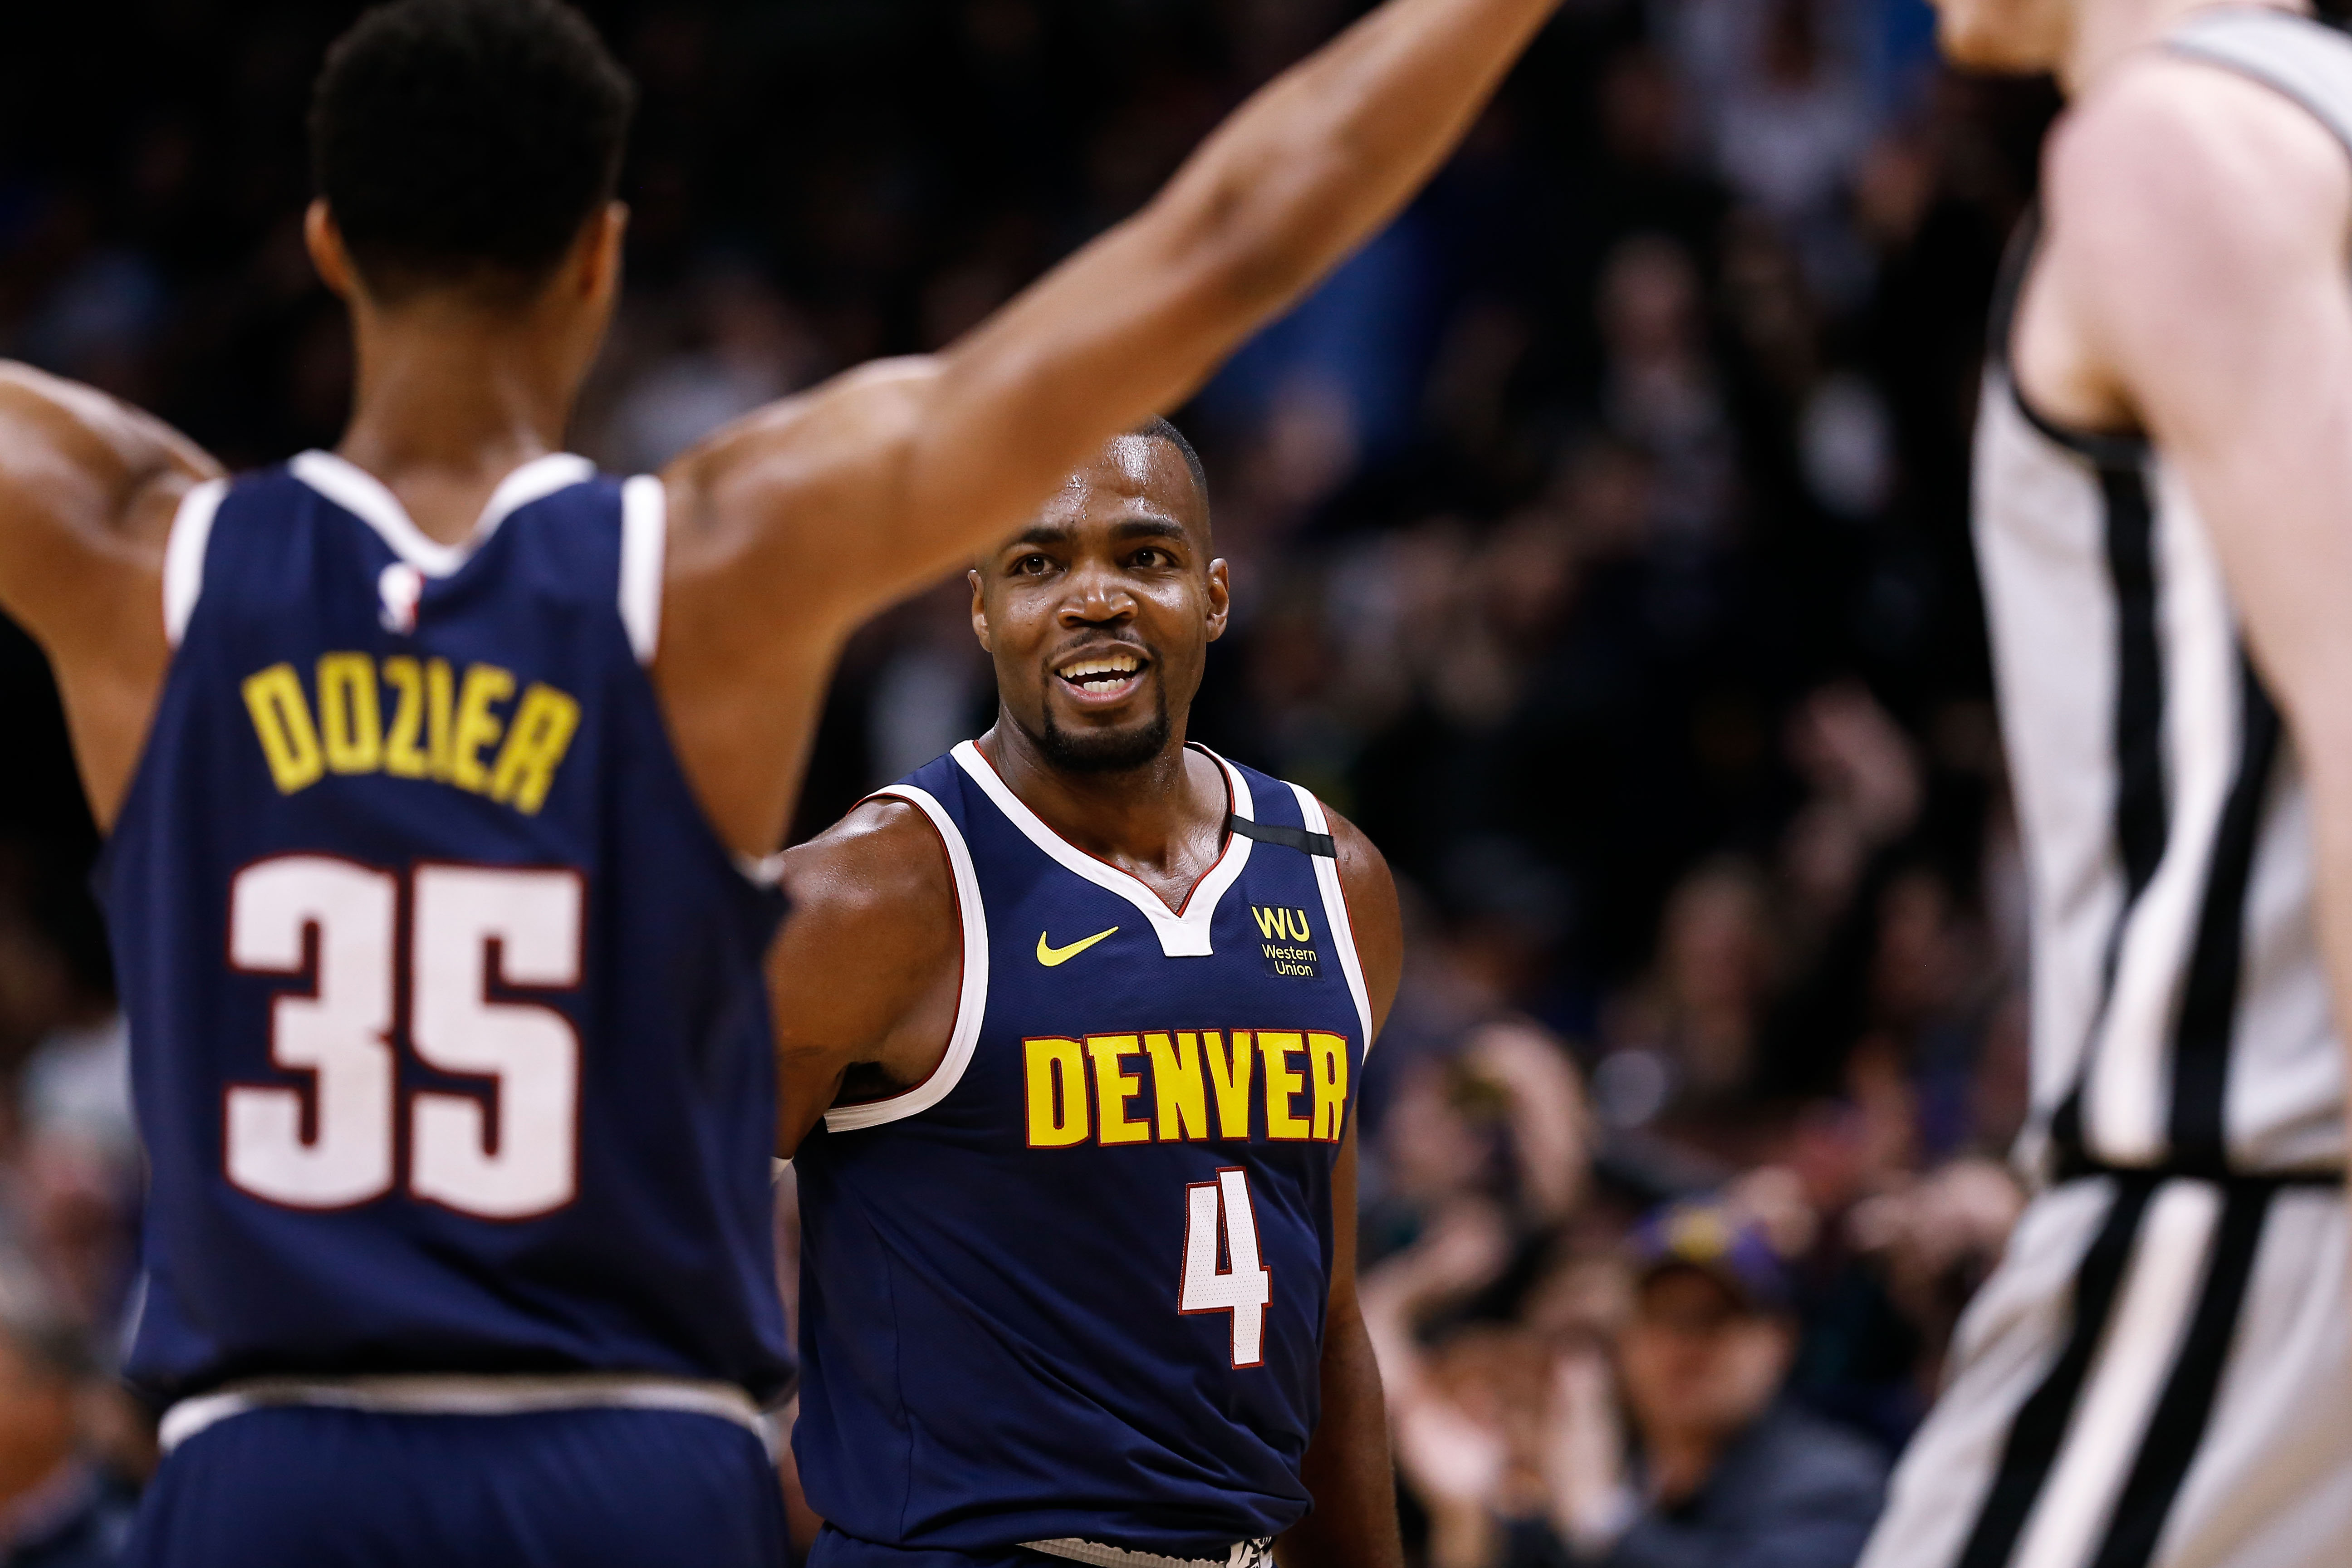 Denver Nuggets forward Paul Millsap (4) celebrates with guard PJ Dozier (35) in the fourth quarter against the San Antonio Spurs at the Pepsi Center.